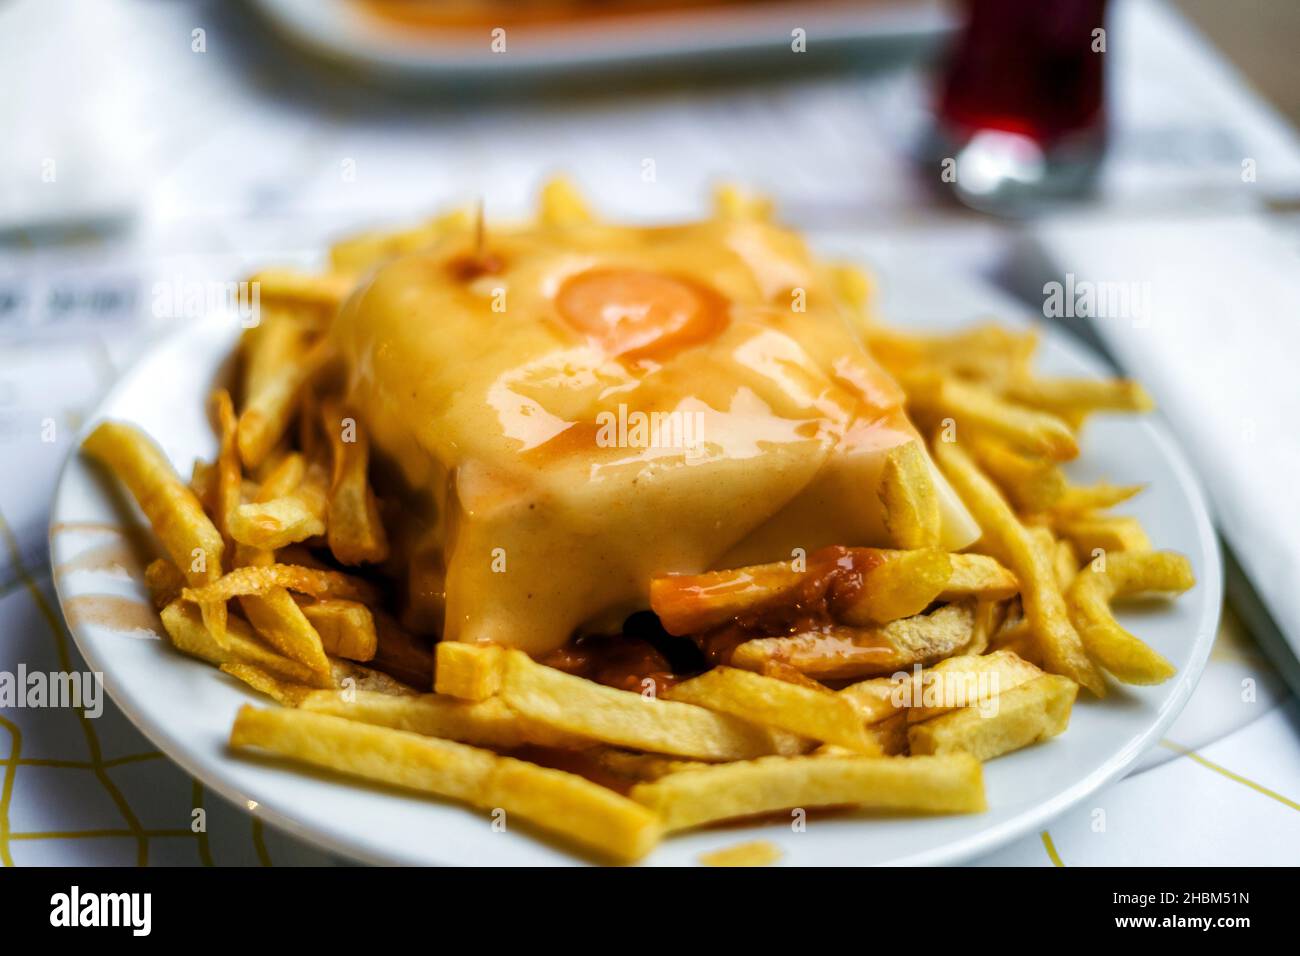 Delicious traditional francesinha served with french fries, Porto, Portugal Stock Photo